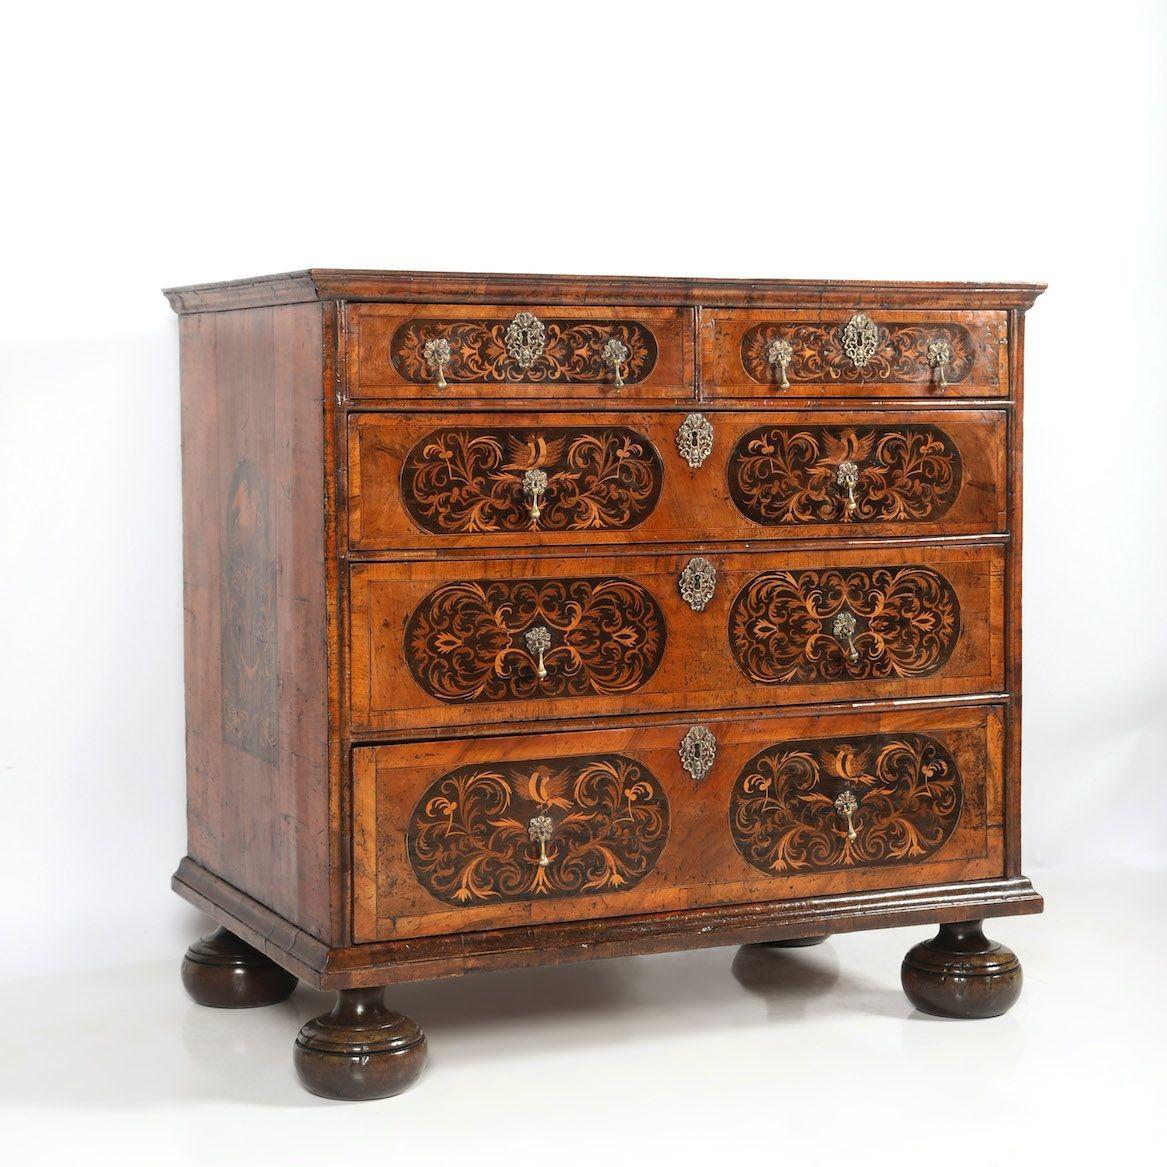 William and Mary 17th c. English William & Mary Walnut and Ebony Seaweed Marquetry Commode For Sale